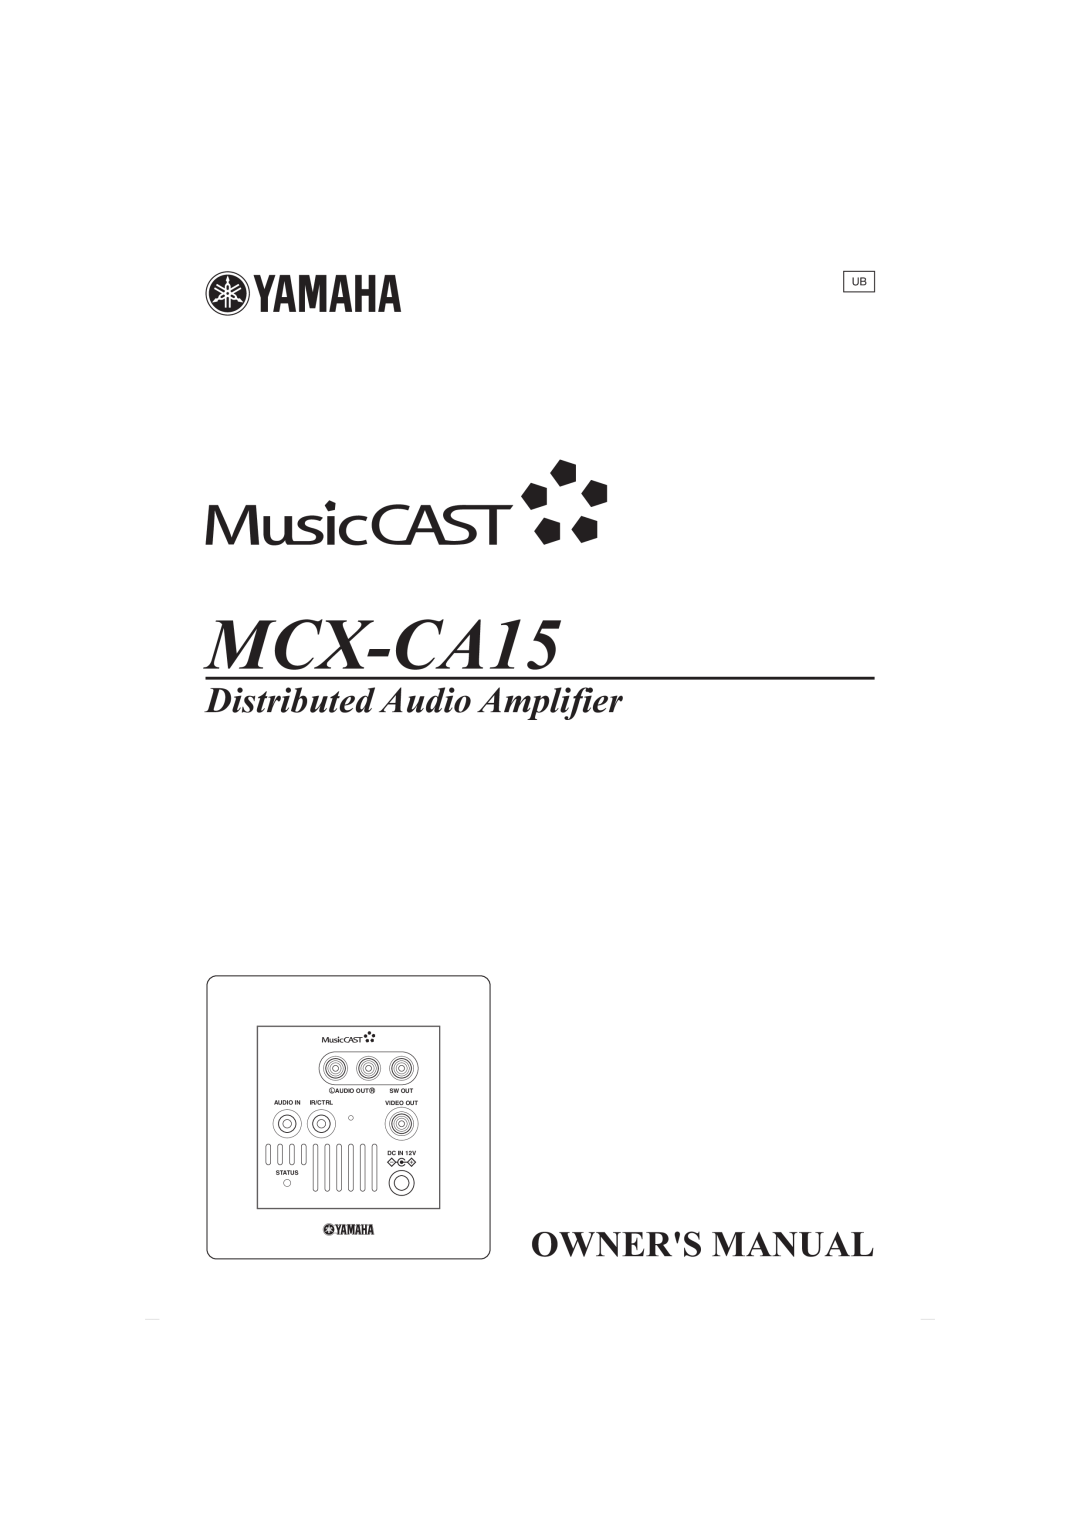 Yamaha MCX-CA15 owner manual Distributed Audio Amplifier, Audio Out, Sw Out, Audio In Ir/Ctrl, Video Out, Dc In, Status 